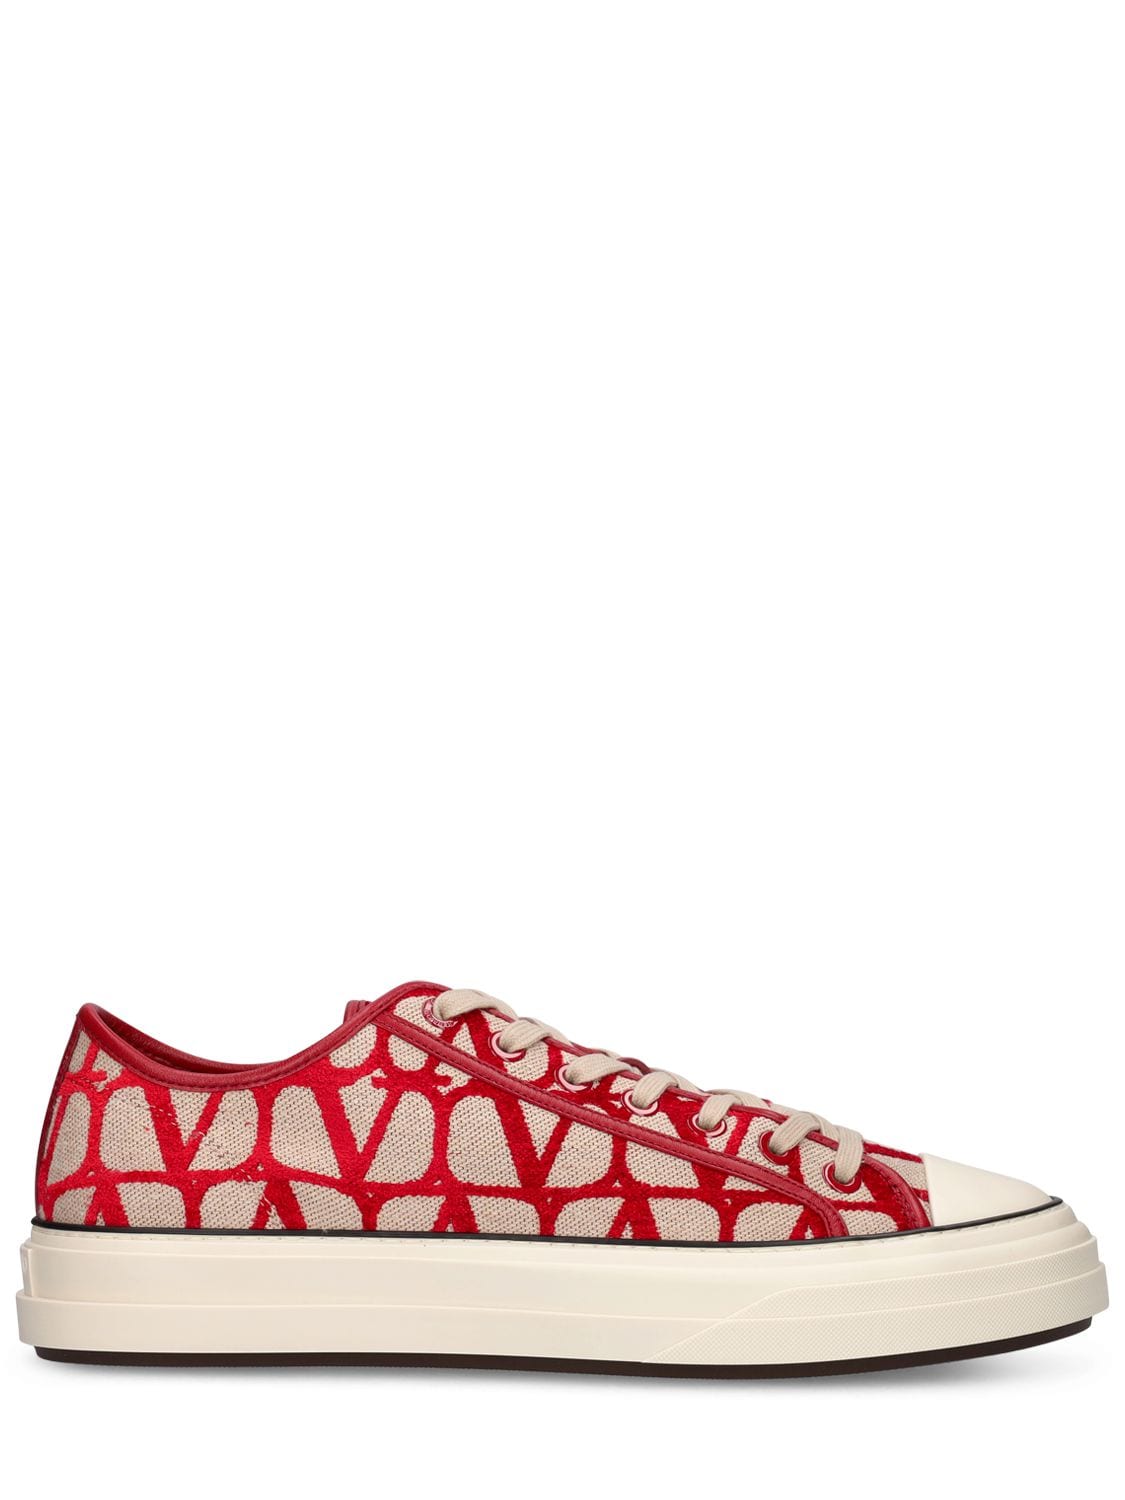 Image of Toile Iconographe Low Top Sneakers